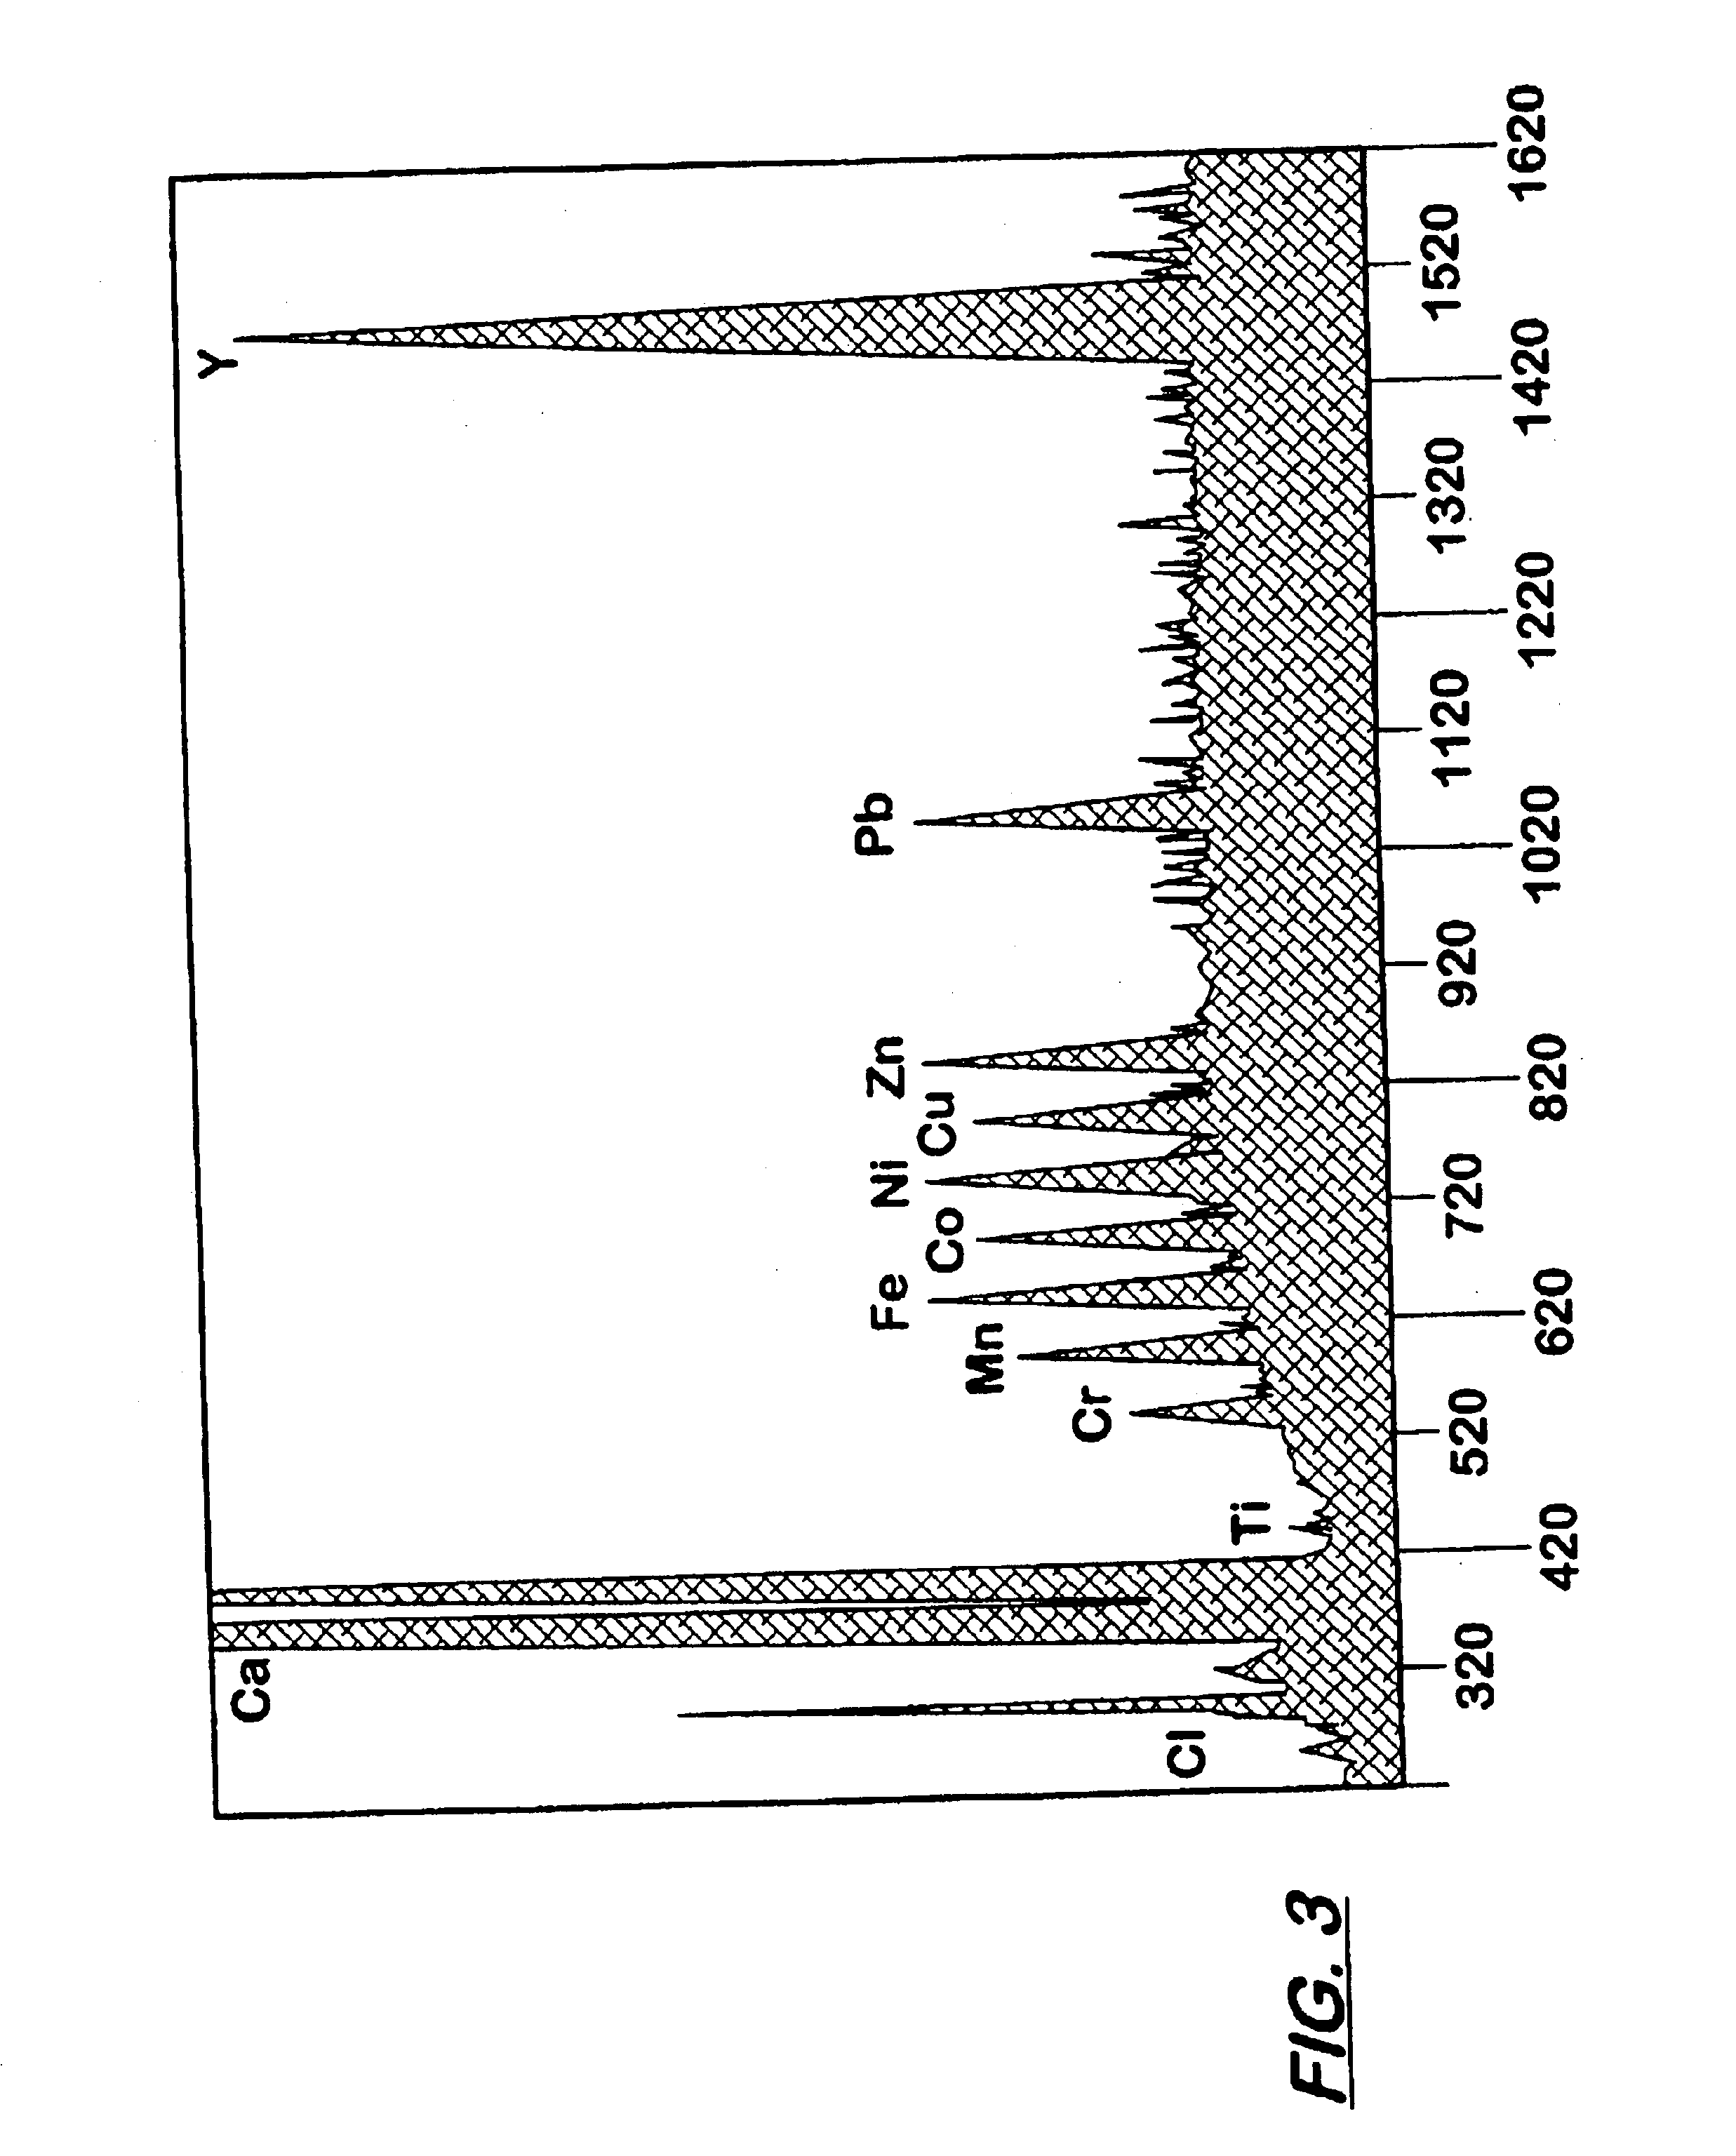 Methods for identification and verification using digital equivalent data system